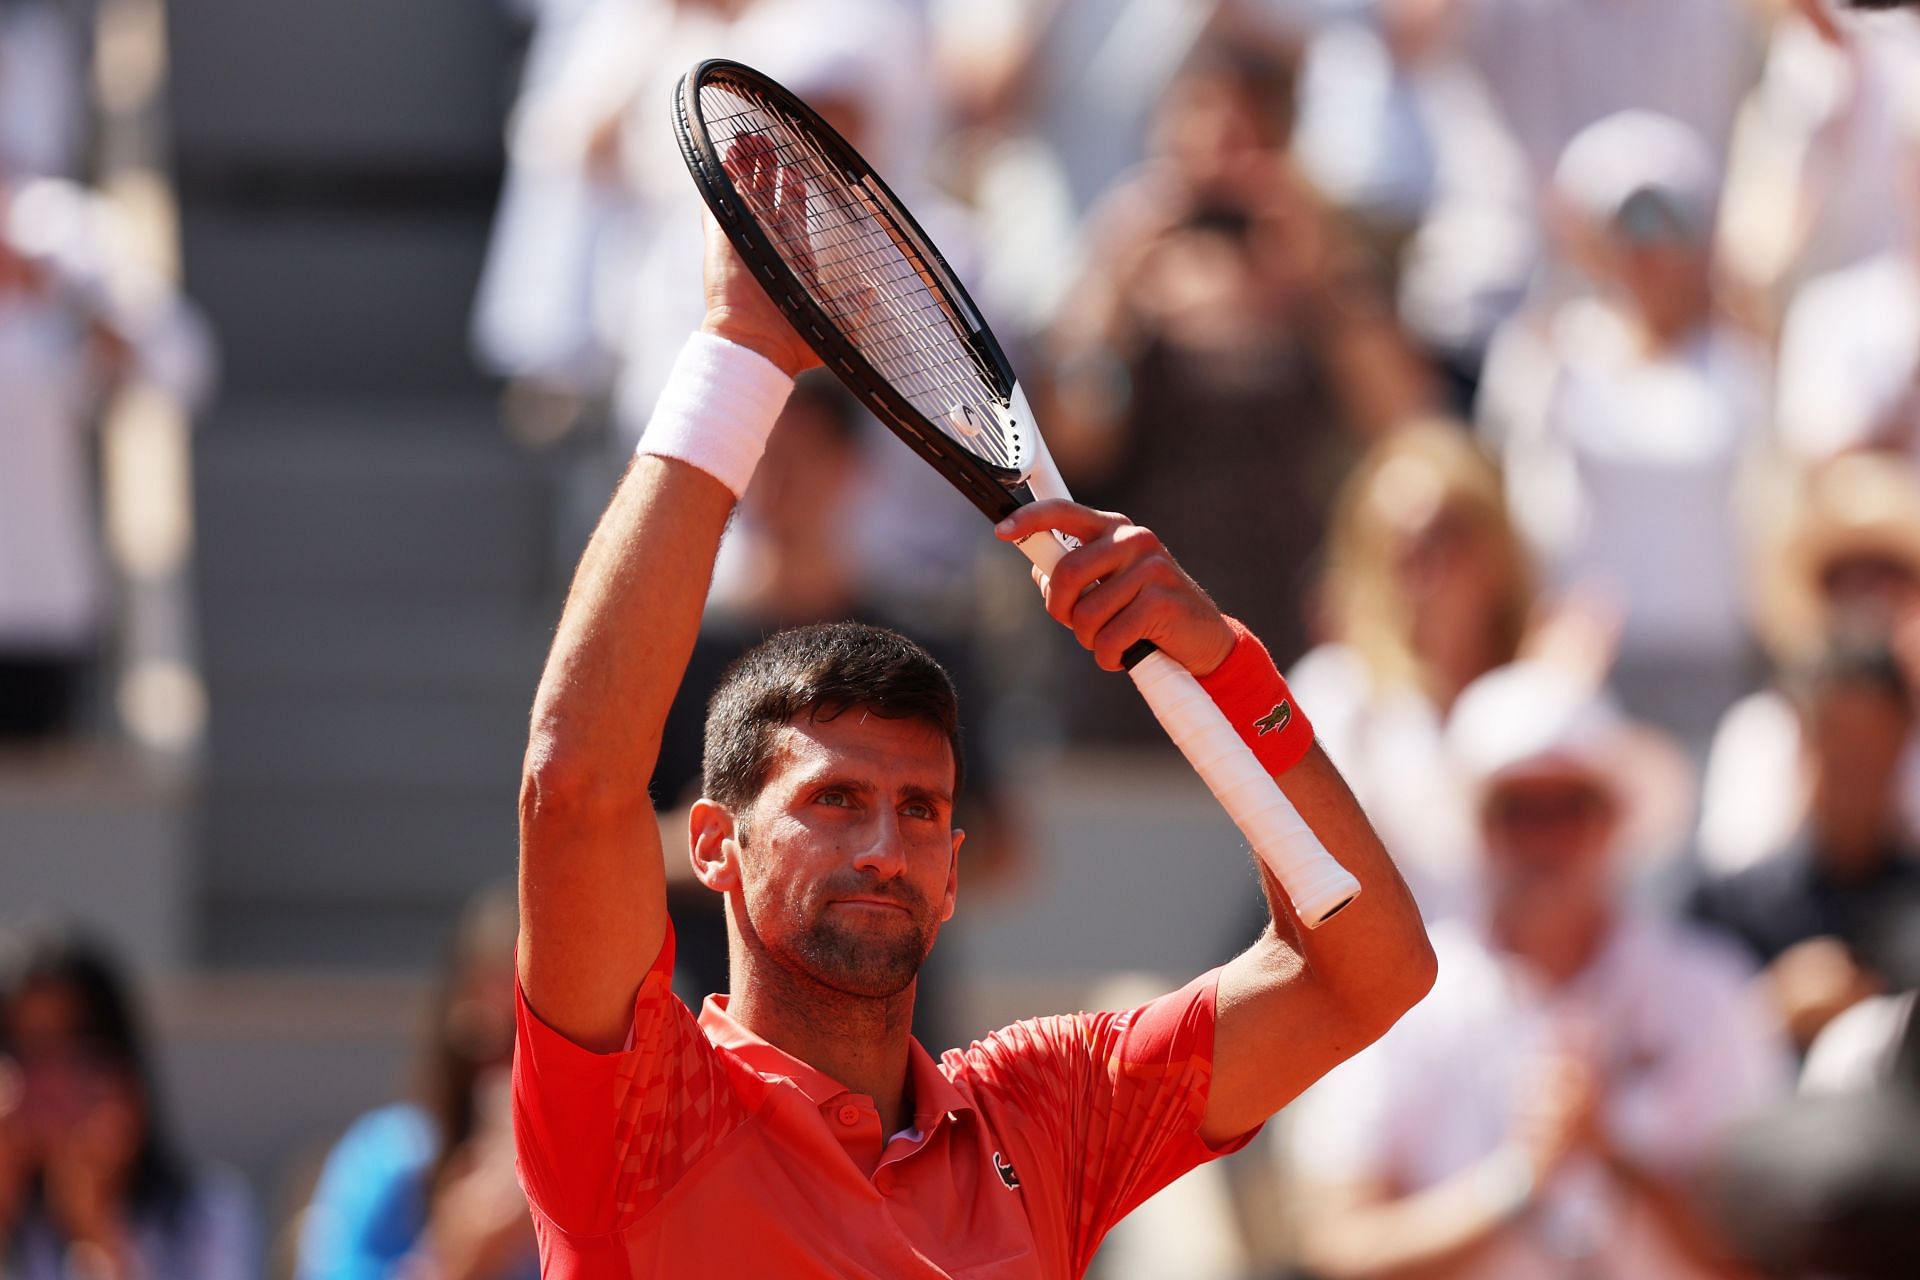 Novak Djokovics next match Opponent, venue, live streaming, TV channel, and schedule French Open 2023, 2R